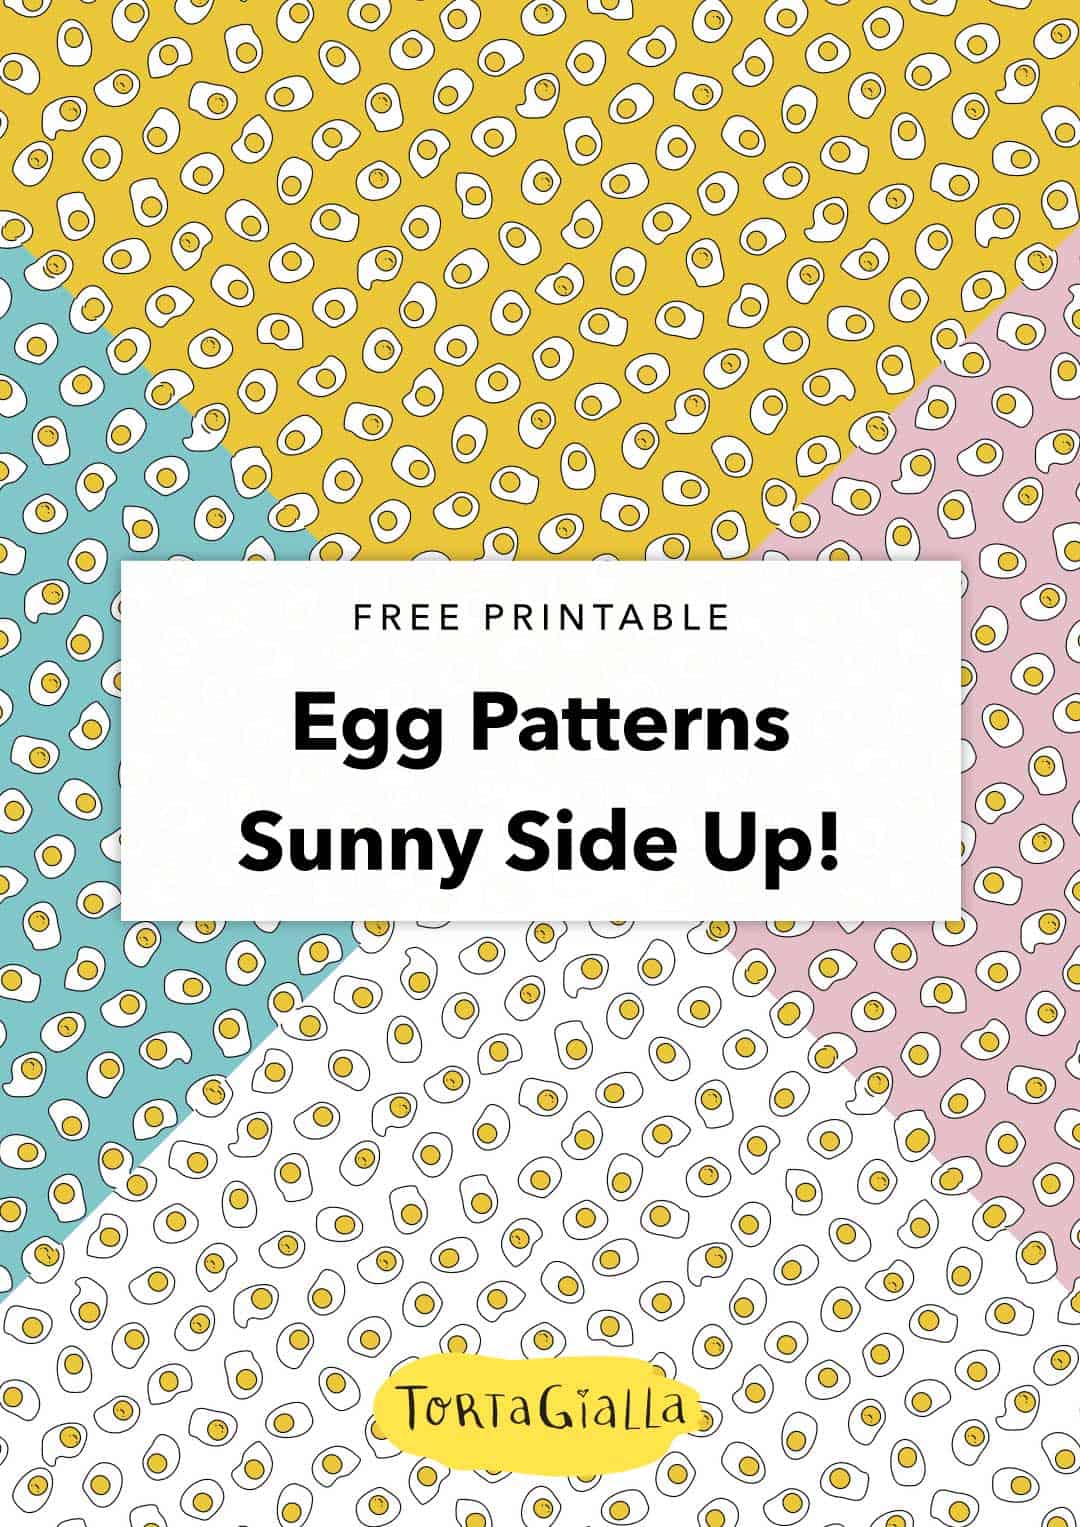 Looking for a cute scrapbook paper printable? How about this sunny side up egg design I created, super cute and bright for your papercrafting projects.